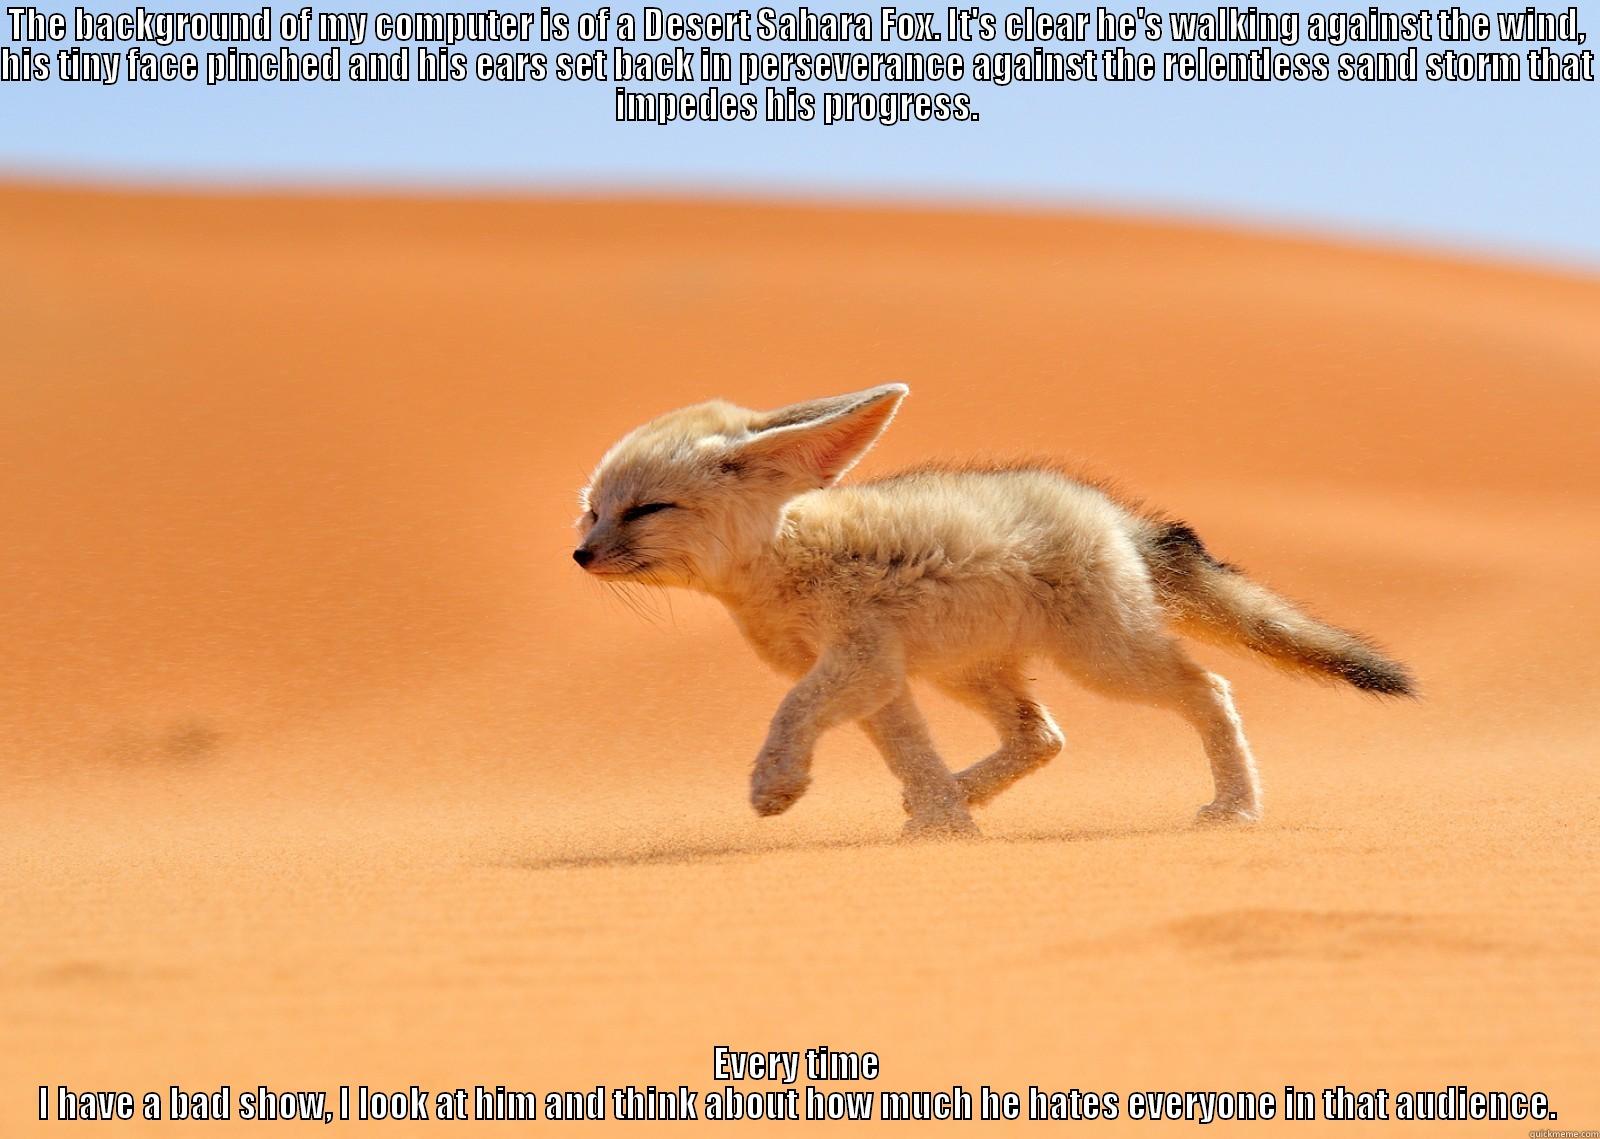 Desert Fox hates you - THE BACKGROUND OF MY COMPUTER IS OF A DESERT SAHARA FOX. IT'S CLEAR HE'S WALKING AGAINST THE WIND, HIS TINY FACE PINCHED AND HIS EARS SET BACK IN PERSEVERANCE AGAINST THE RELENTLESS SAND STORM THAT IMPEDES HIS PROGRESS. EVERY TIME I HAVE A BAD SHOW, I LOOK AT HIM AND THINK ABOUT HOW MUCH HE HATES EVERYONE IN THAT AUDIENCE. Misc